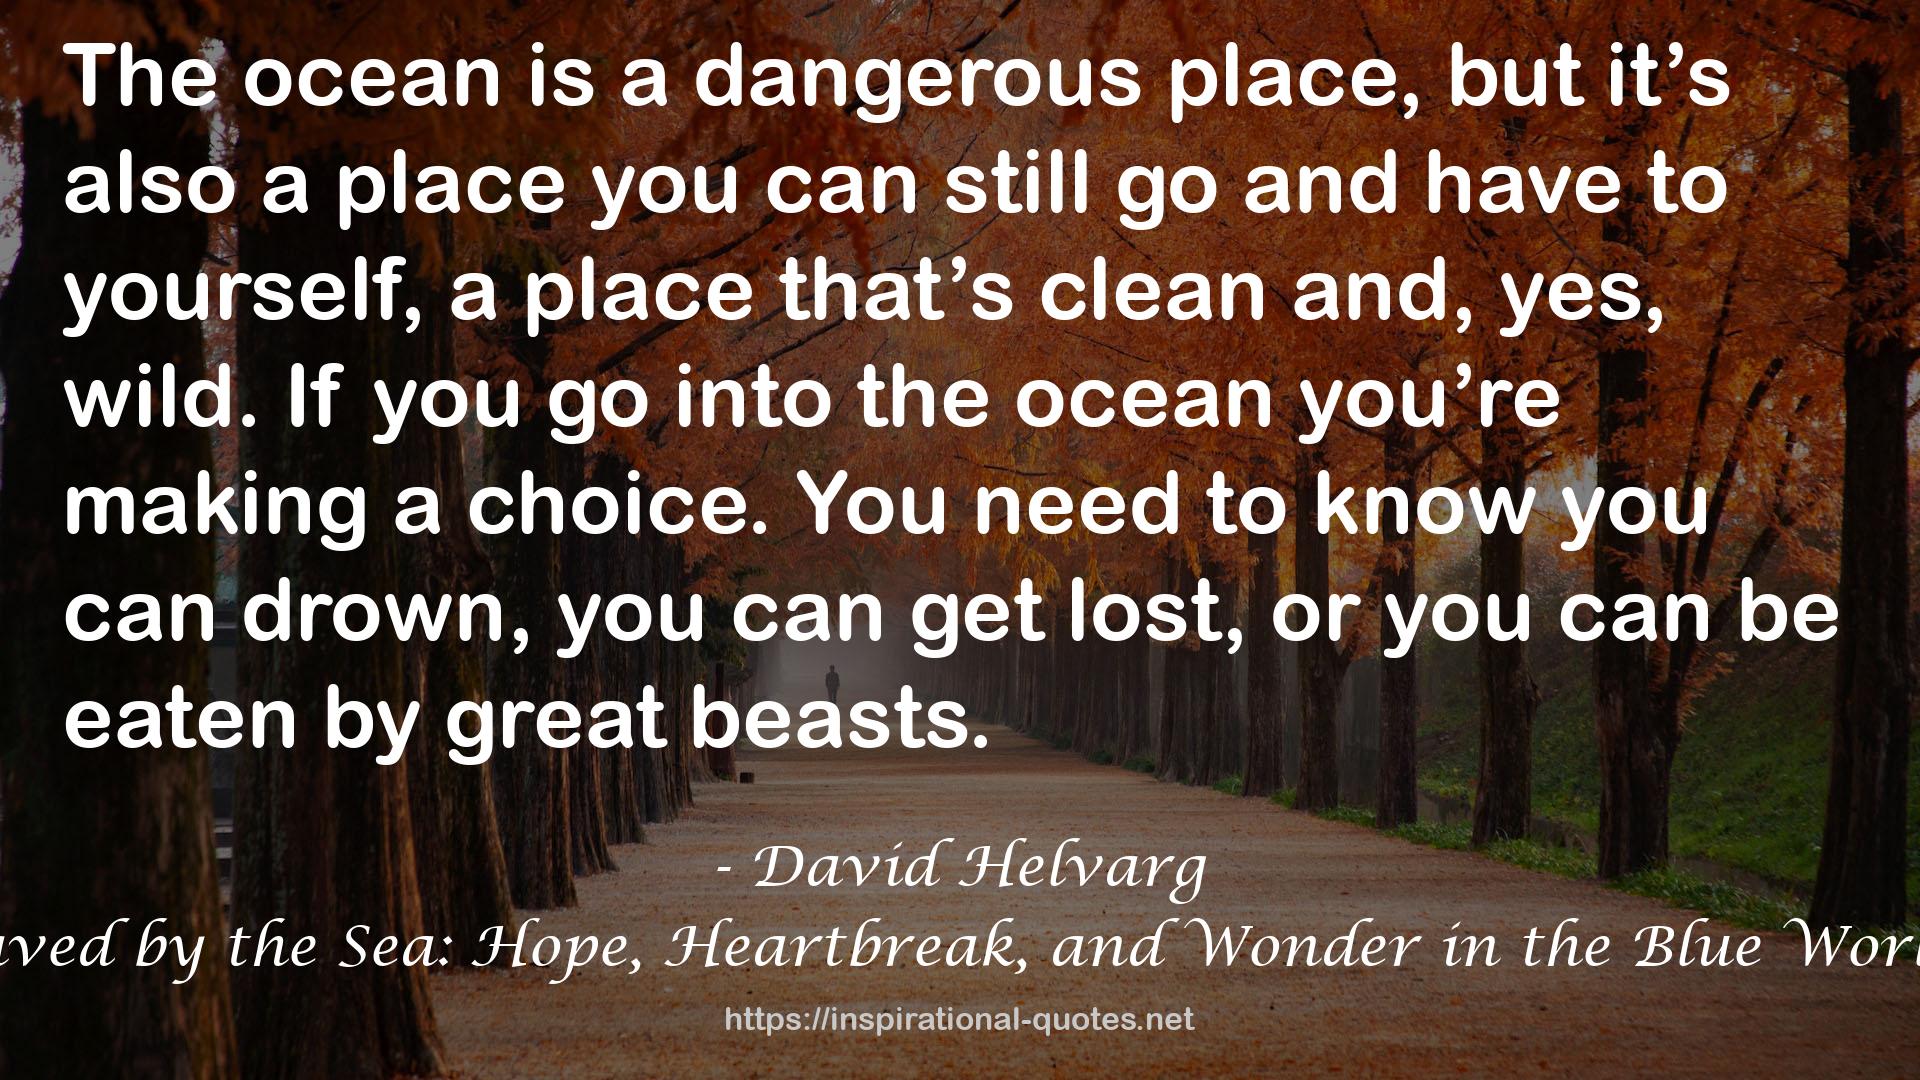 Saved by the Sea: Hope, Heartbreak, and Wonder in the Blue World QUOTES